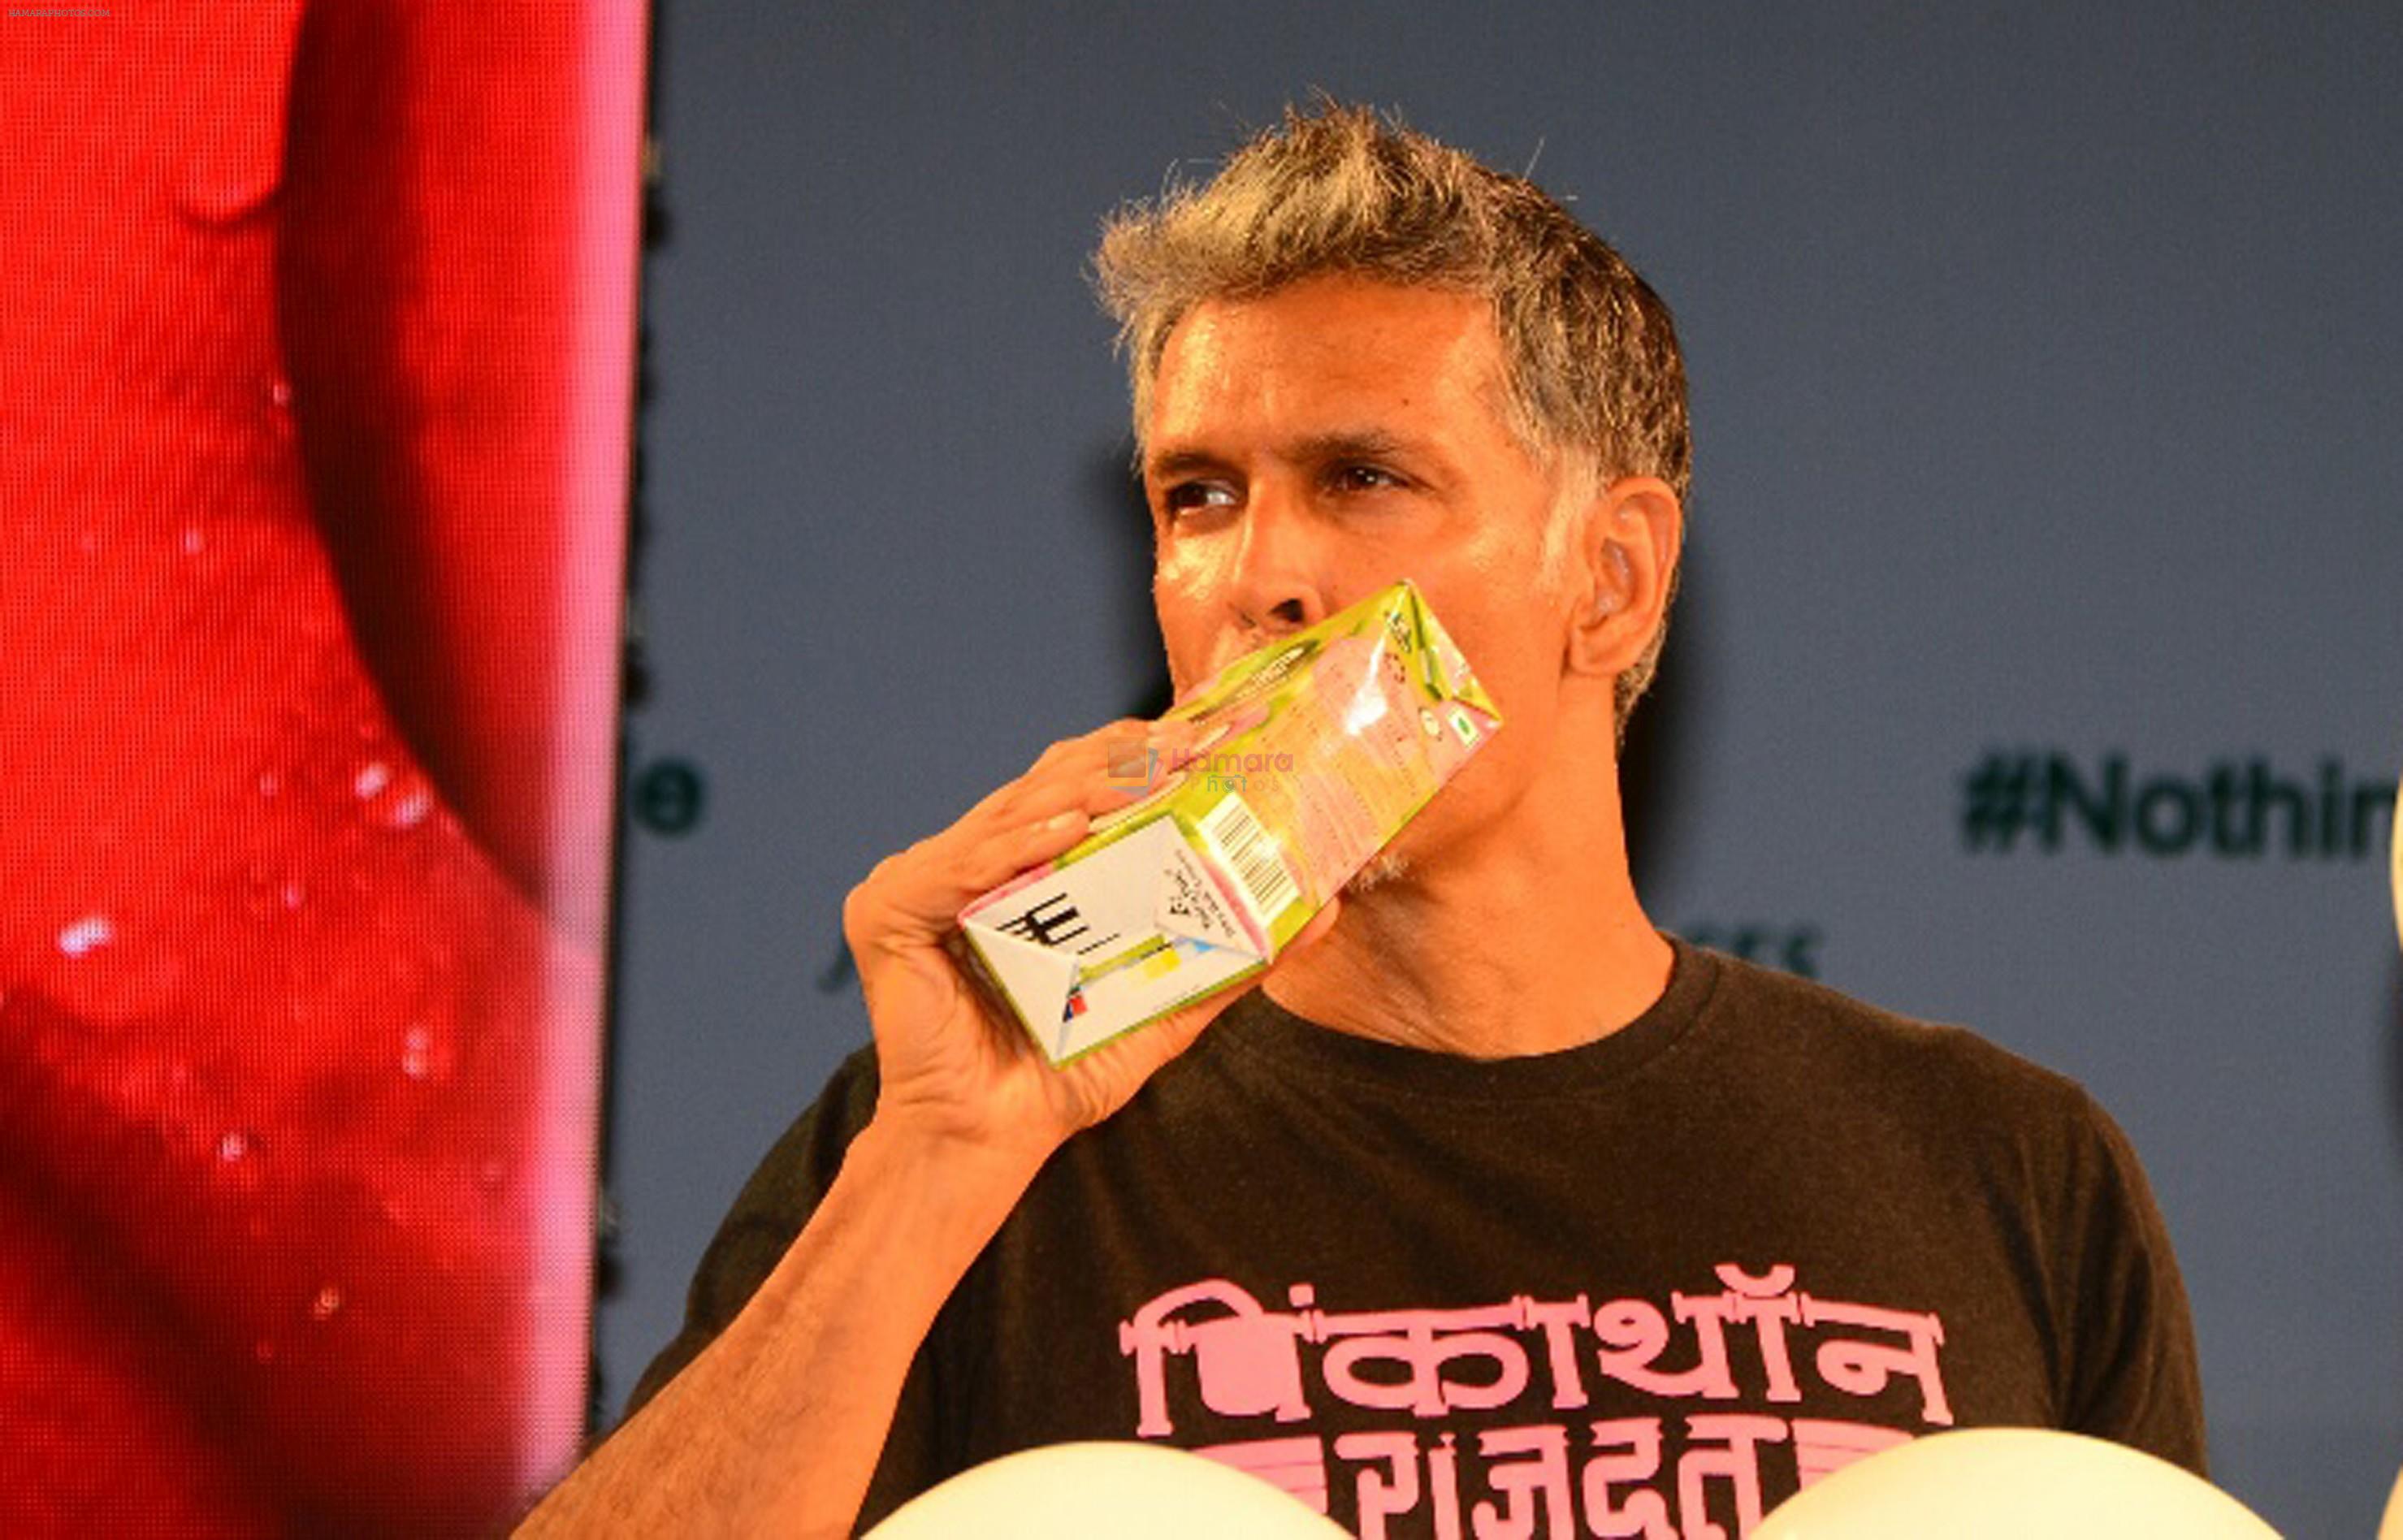 Milind Soman At Launch Of B Natural New Range Of Juices on 9th April 2018